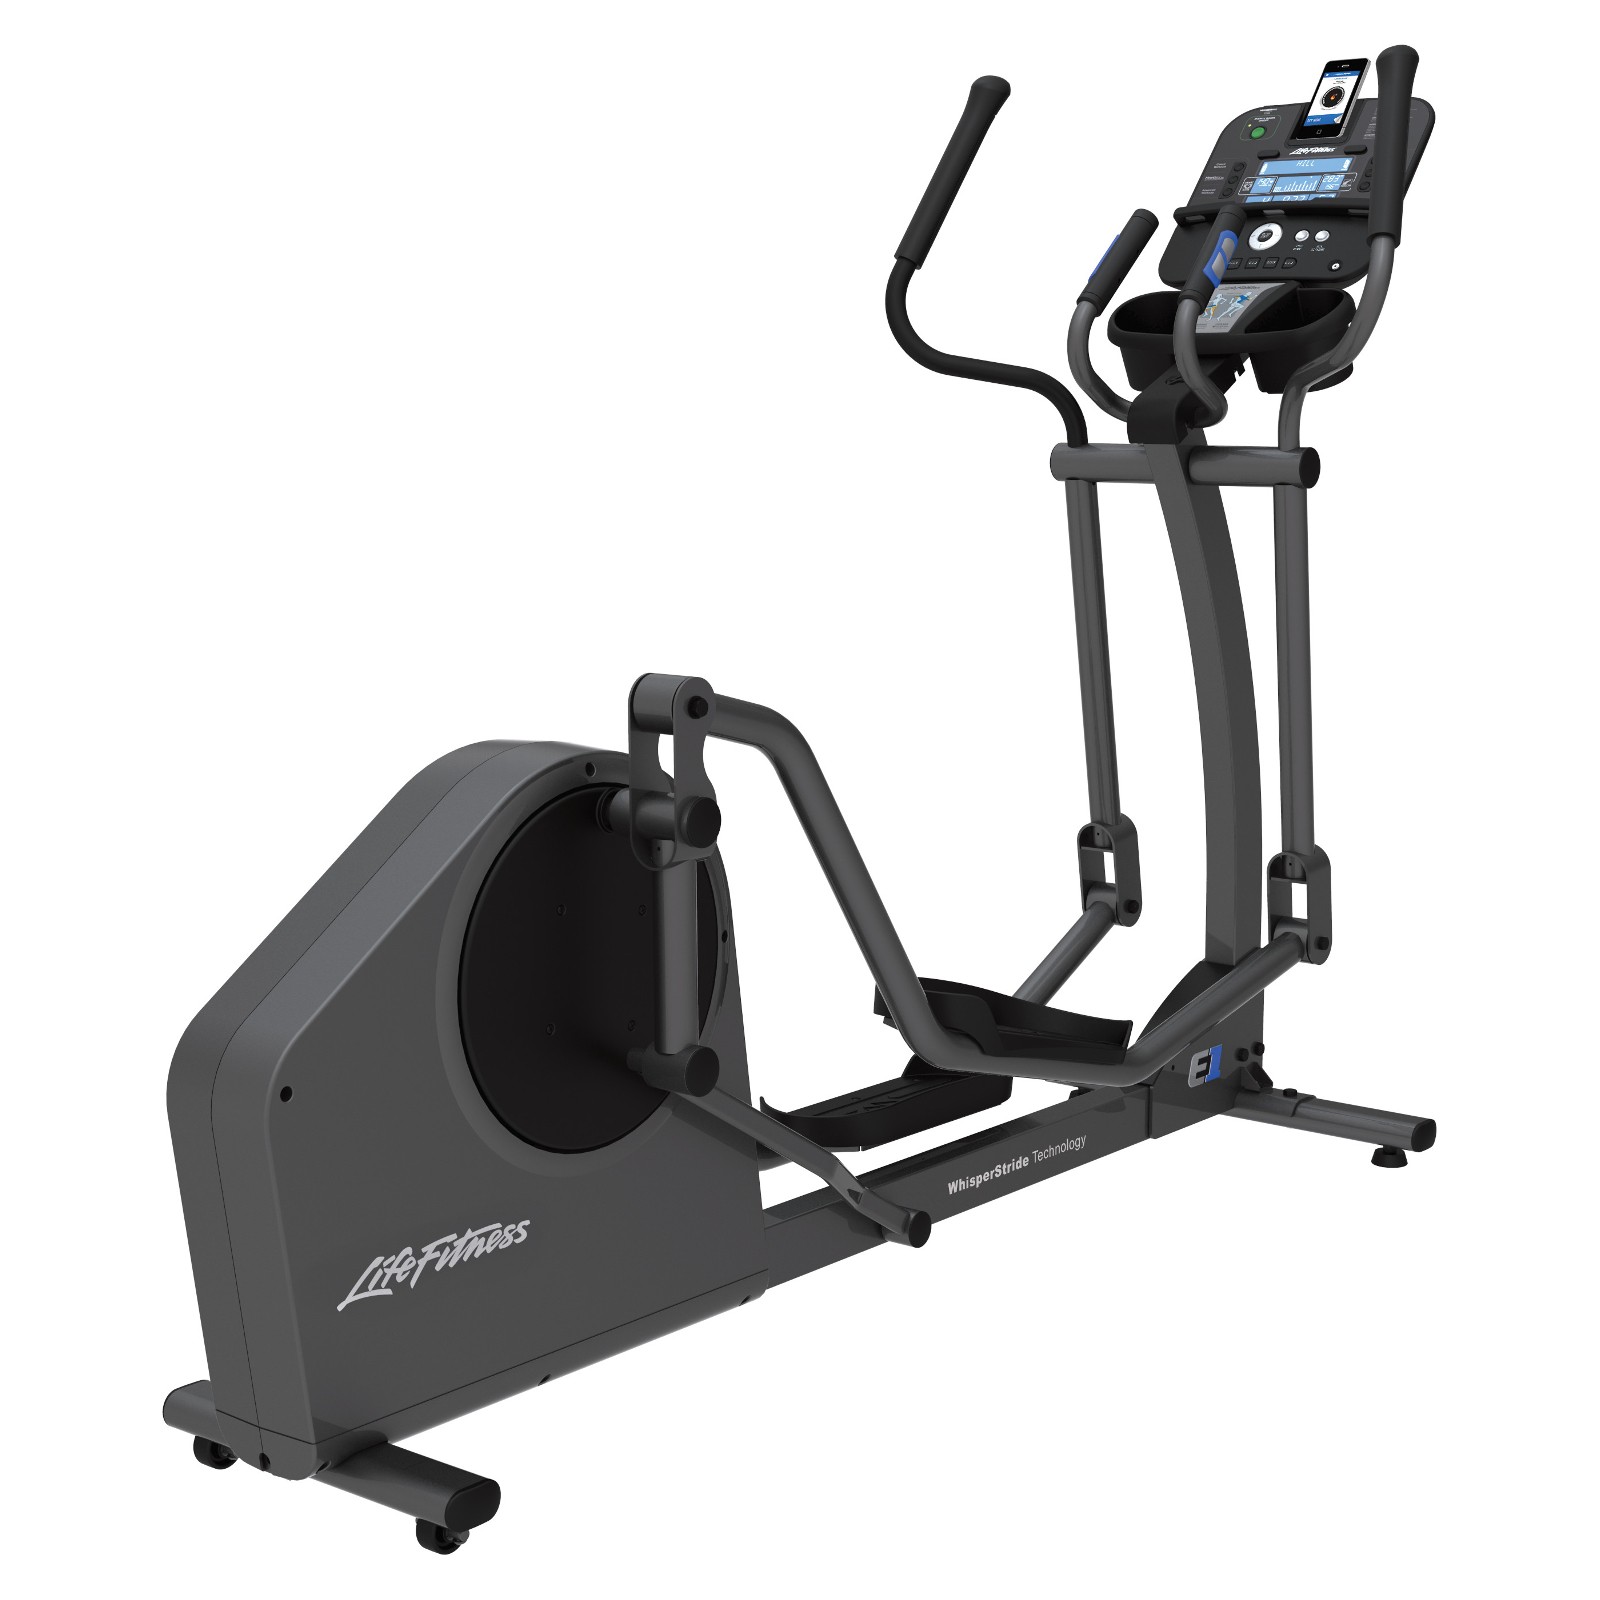 bike-gear-online-shopping-india-elliptical-trainer-life-fitness-x3-fitness-store-joondalup